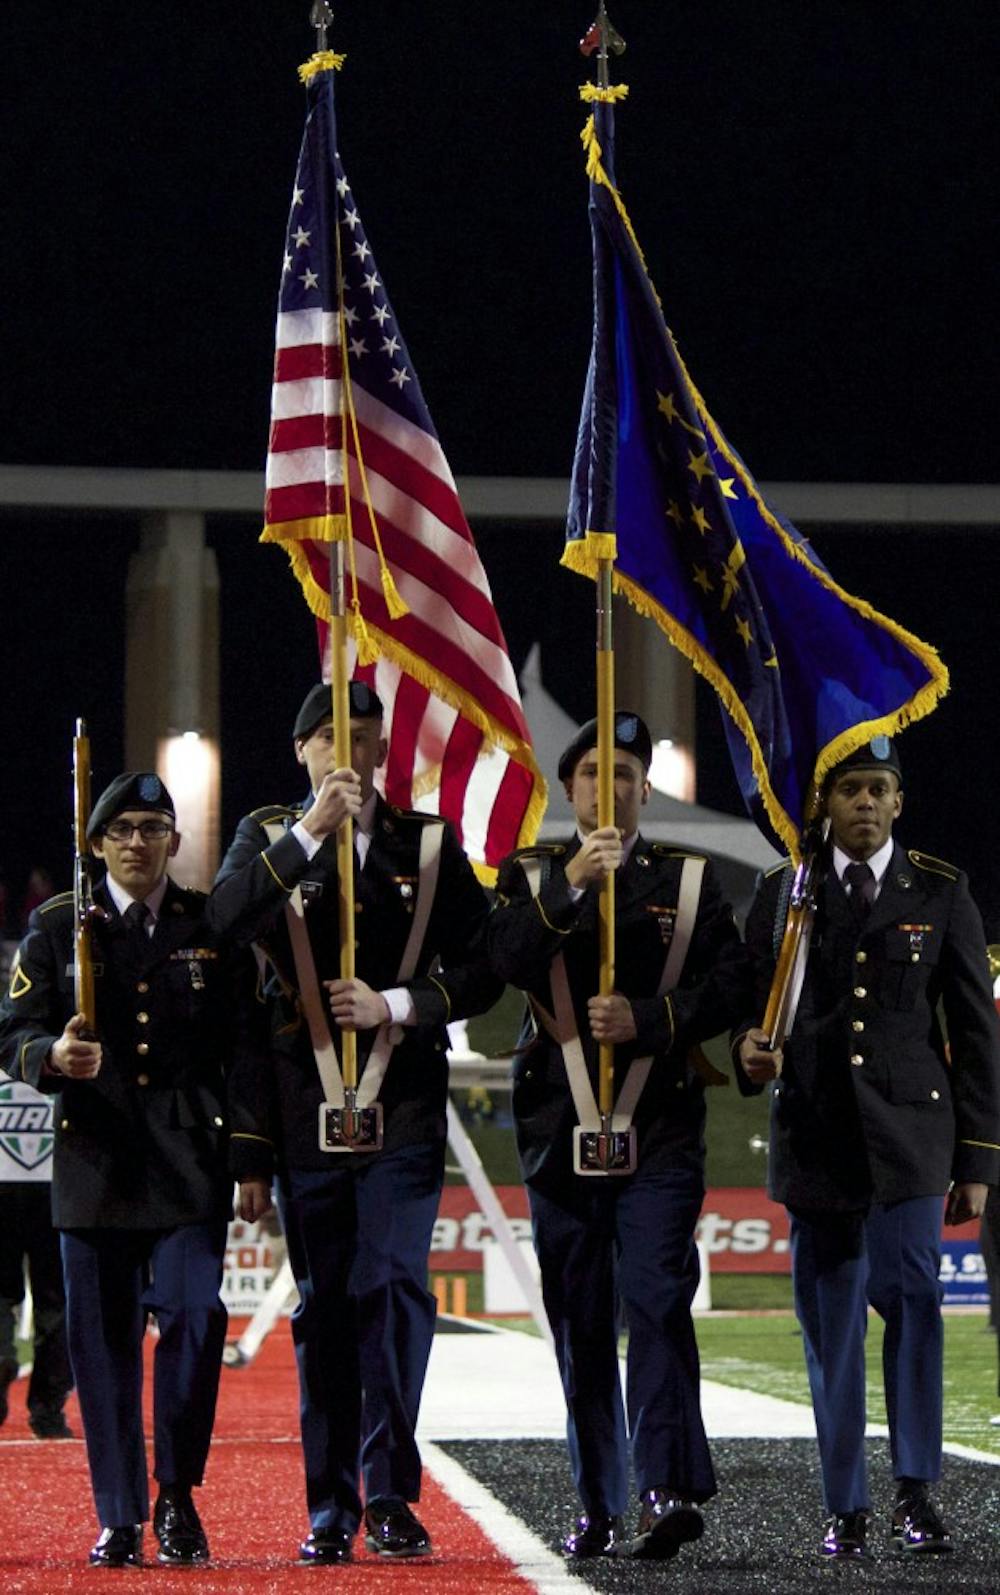 Members of the military lead the American flag off the field after the singing of the National Anthem before the game against Bowling Green on Nov. 24 in Scheumann Stadium. DN PHOTO GRACE RAMEY